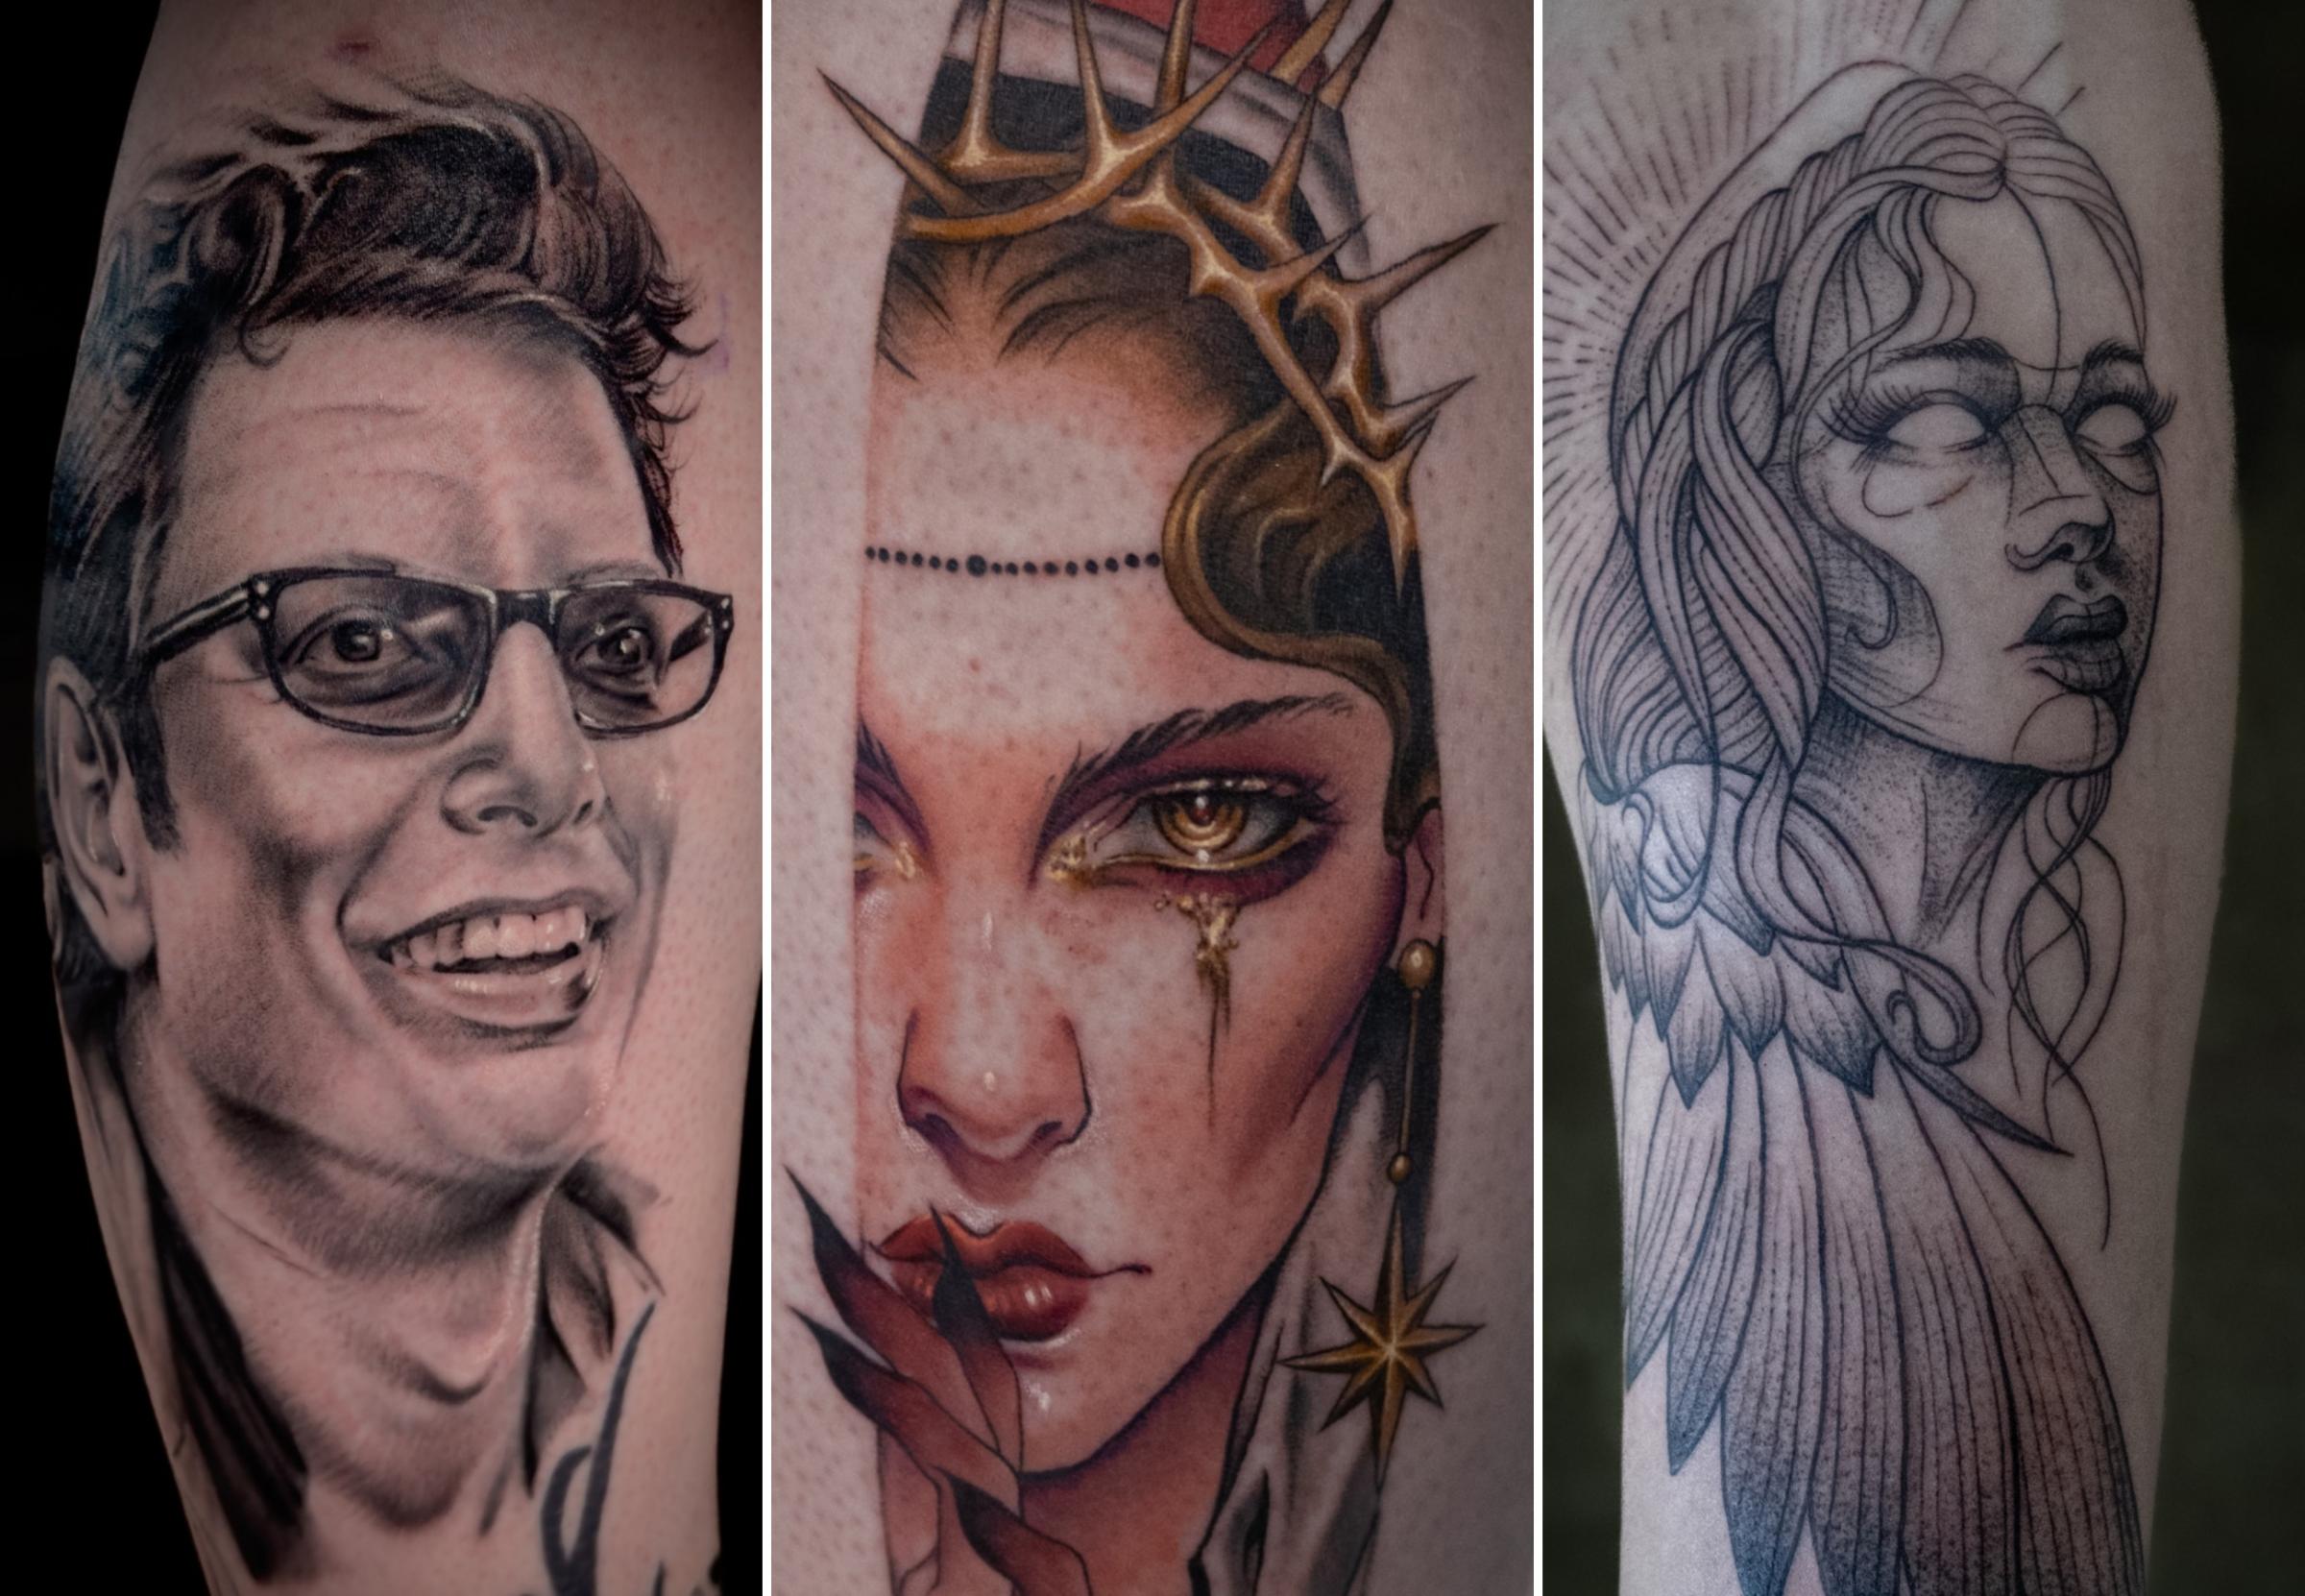 Tattoos designs by Lewis, Sophie and Chaz